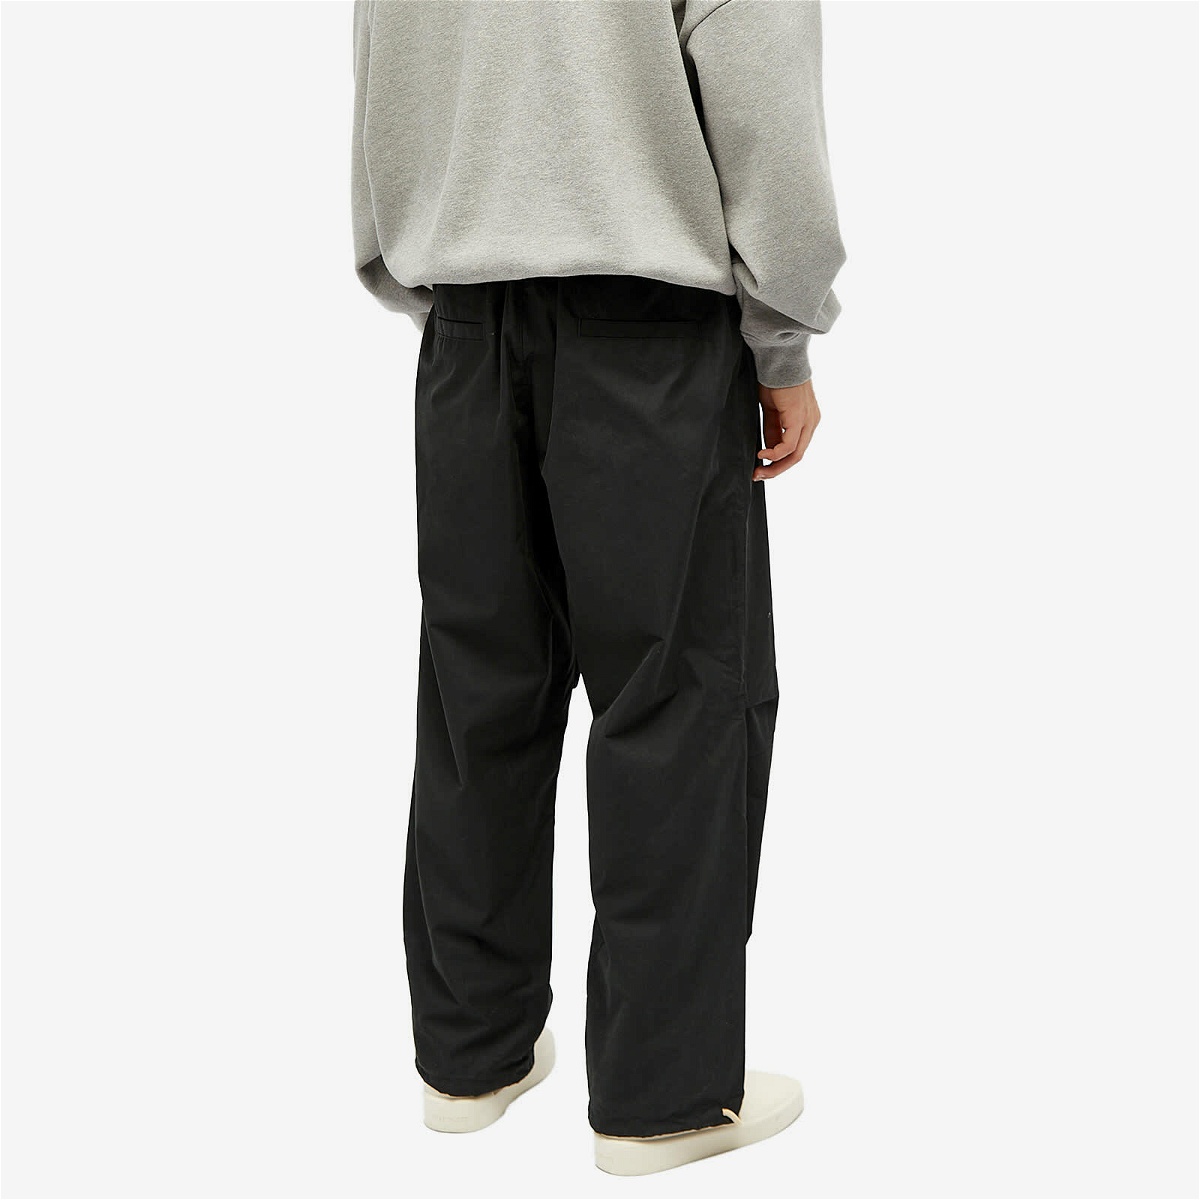 Fear of God ESSENTIALS Men's Relaxed Trouser in Jet Black